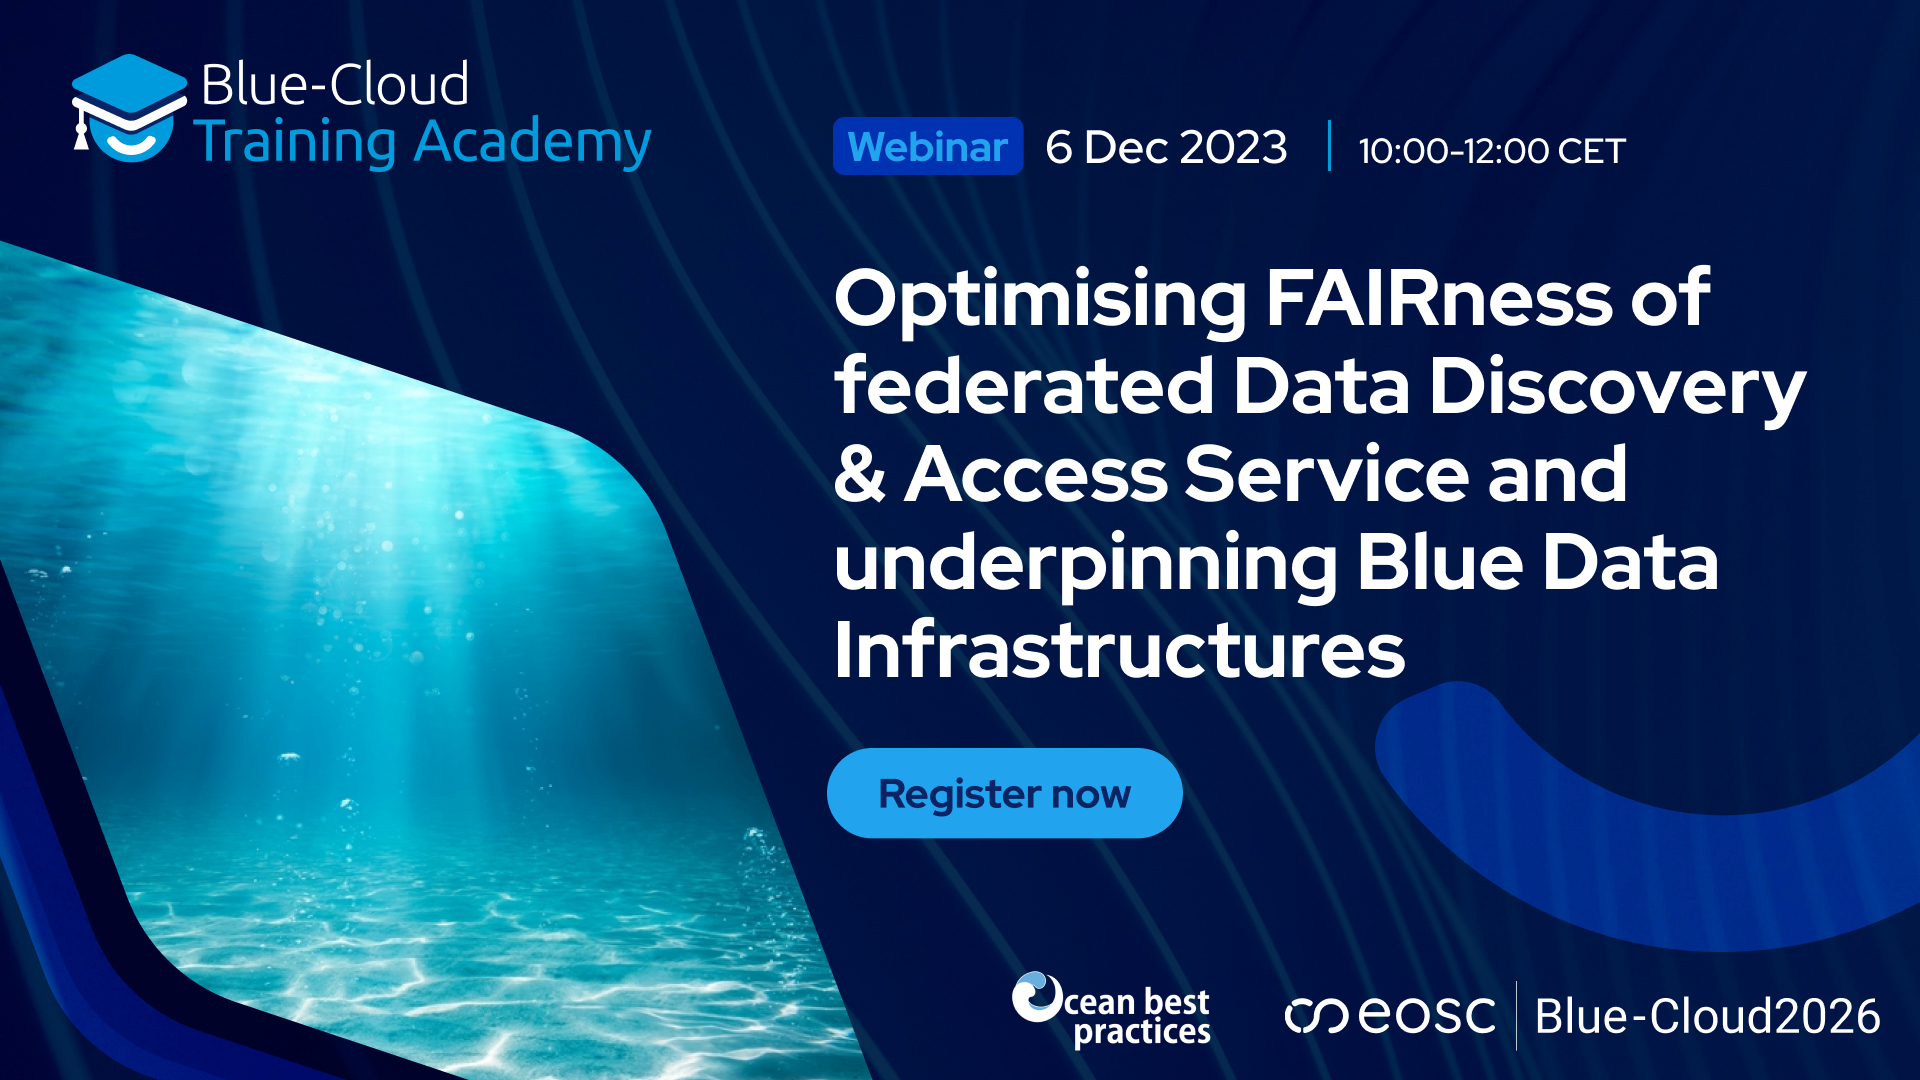 Optimising FAIRness of federated Data Discovery & Access Service and underpinning Blue Data Infrastructures